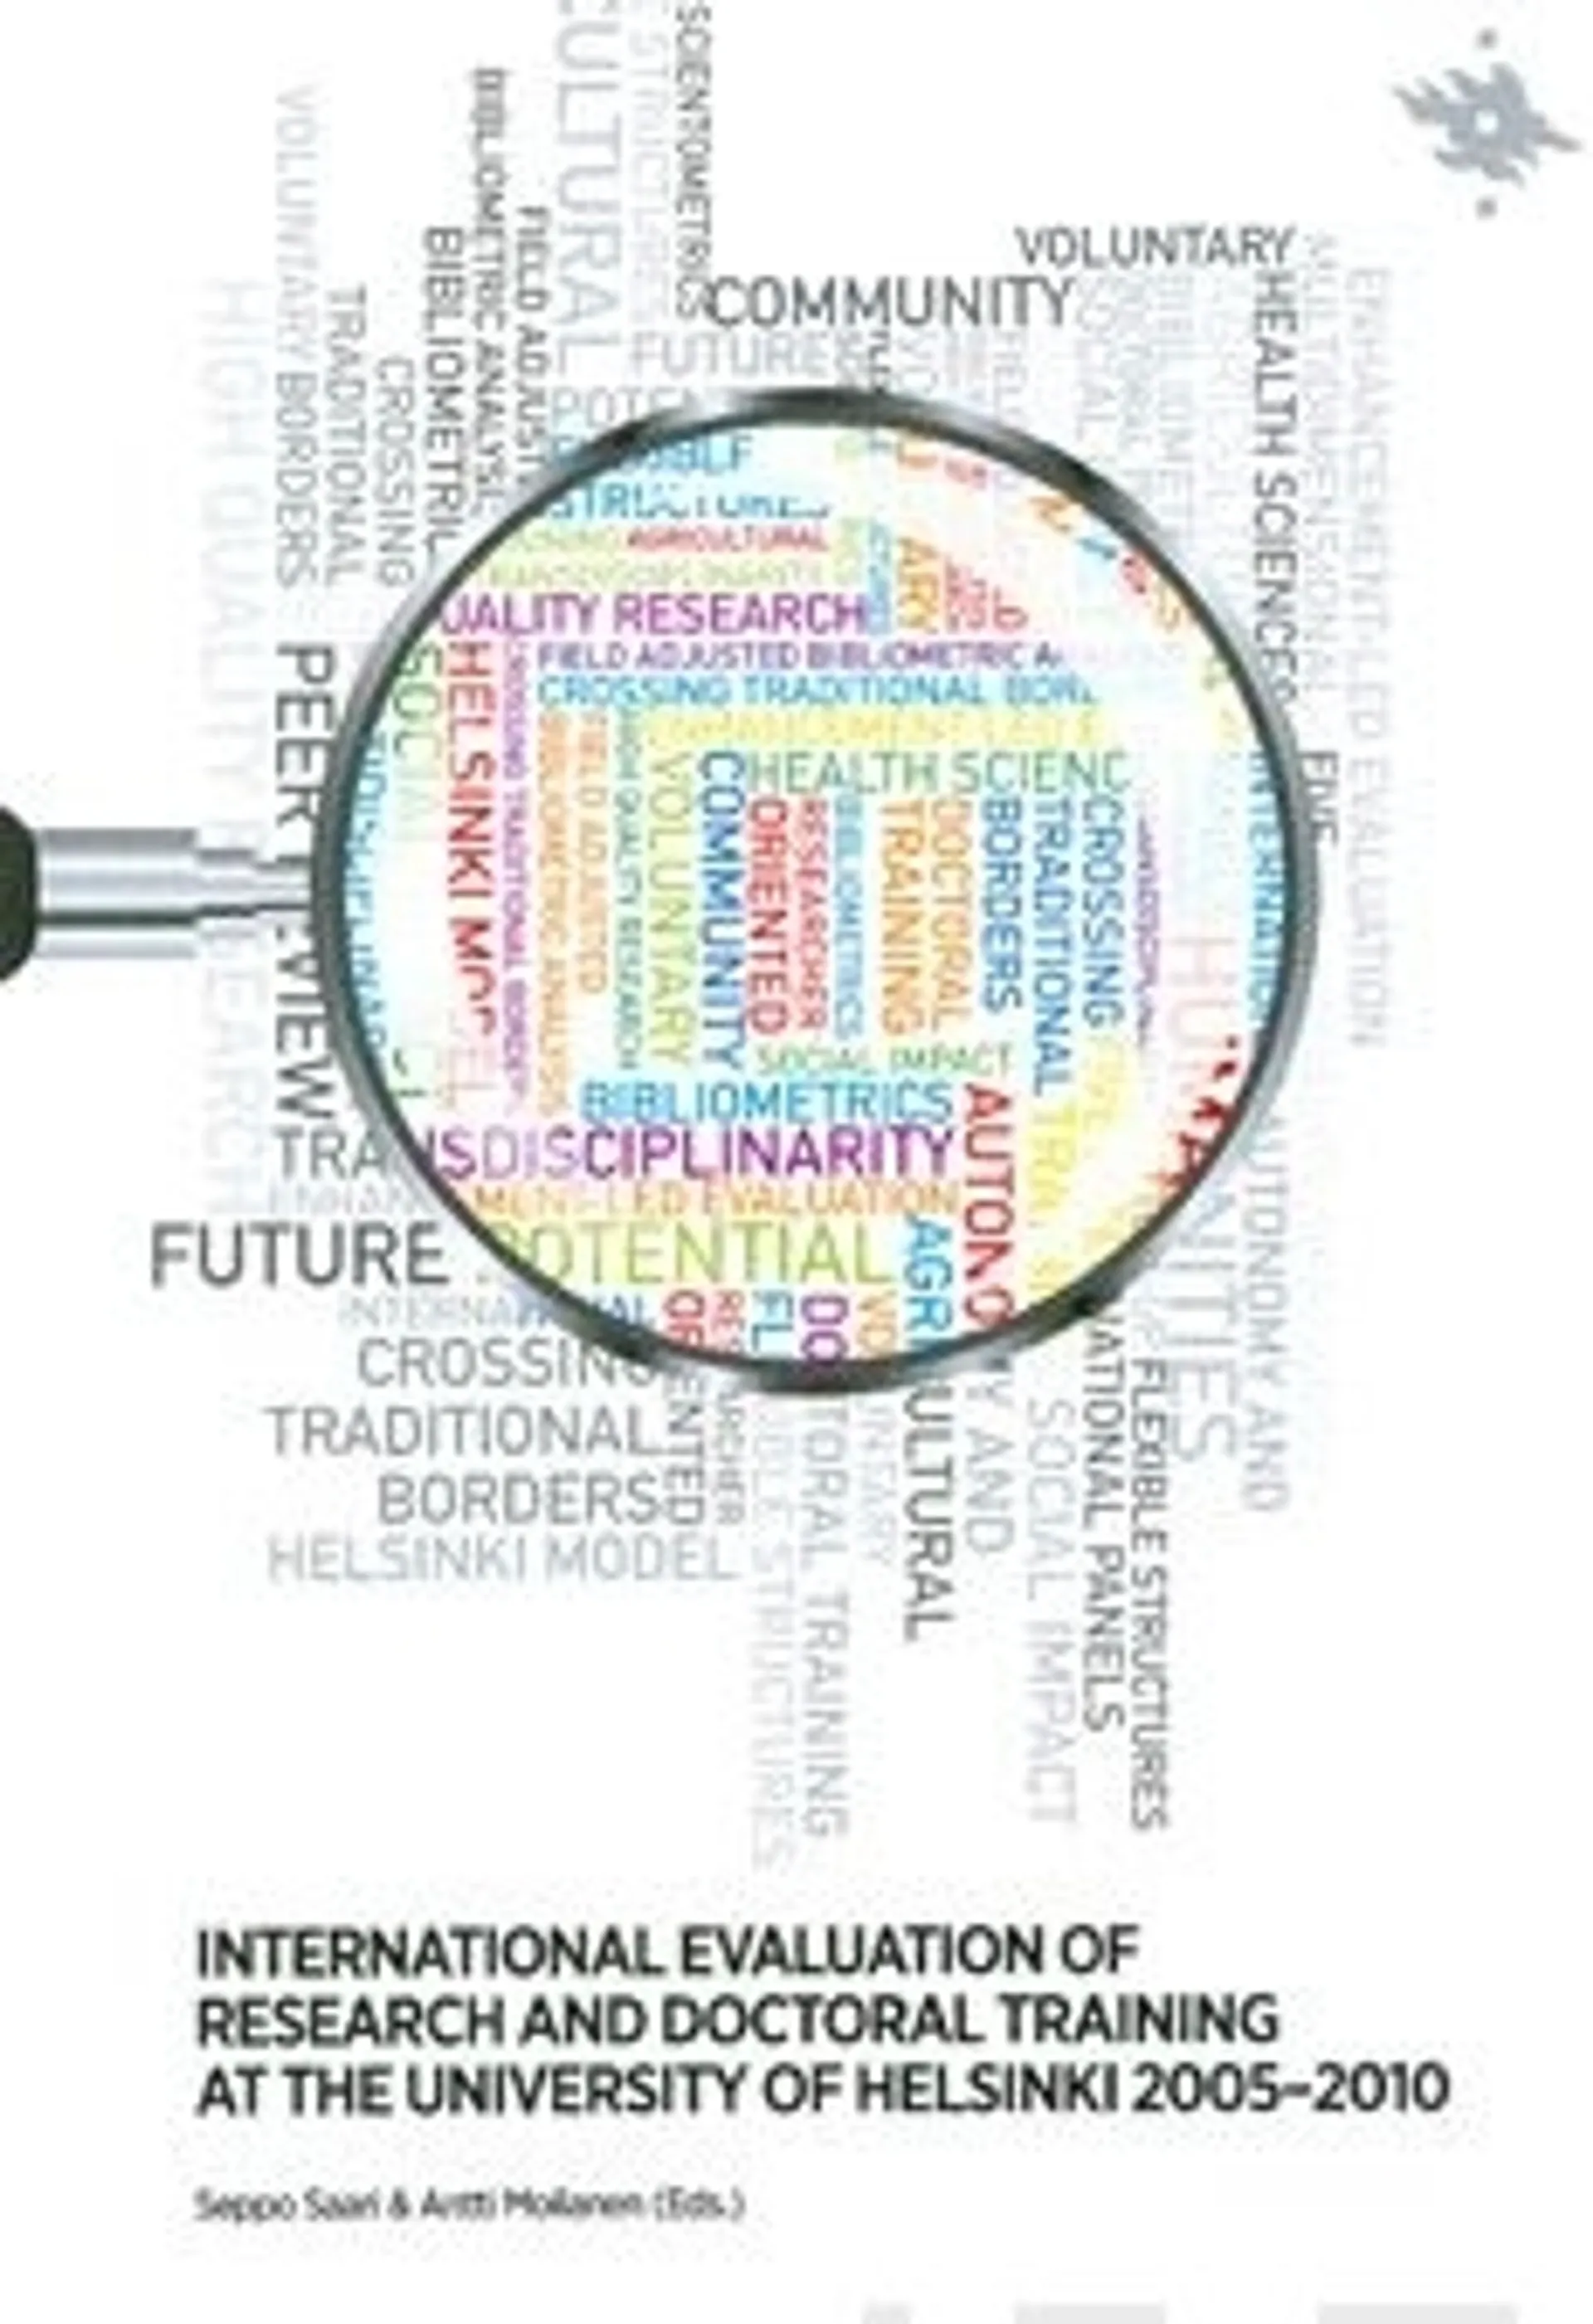 International Evaluation for Research and Doctoral Training at the University of Helsinki 2005-2010